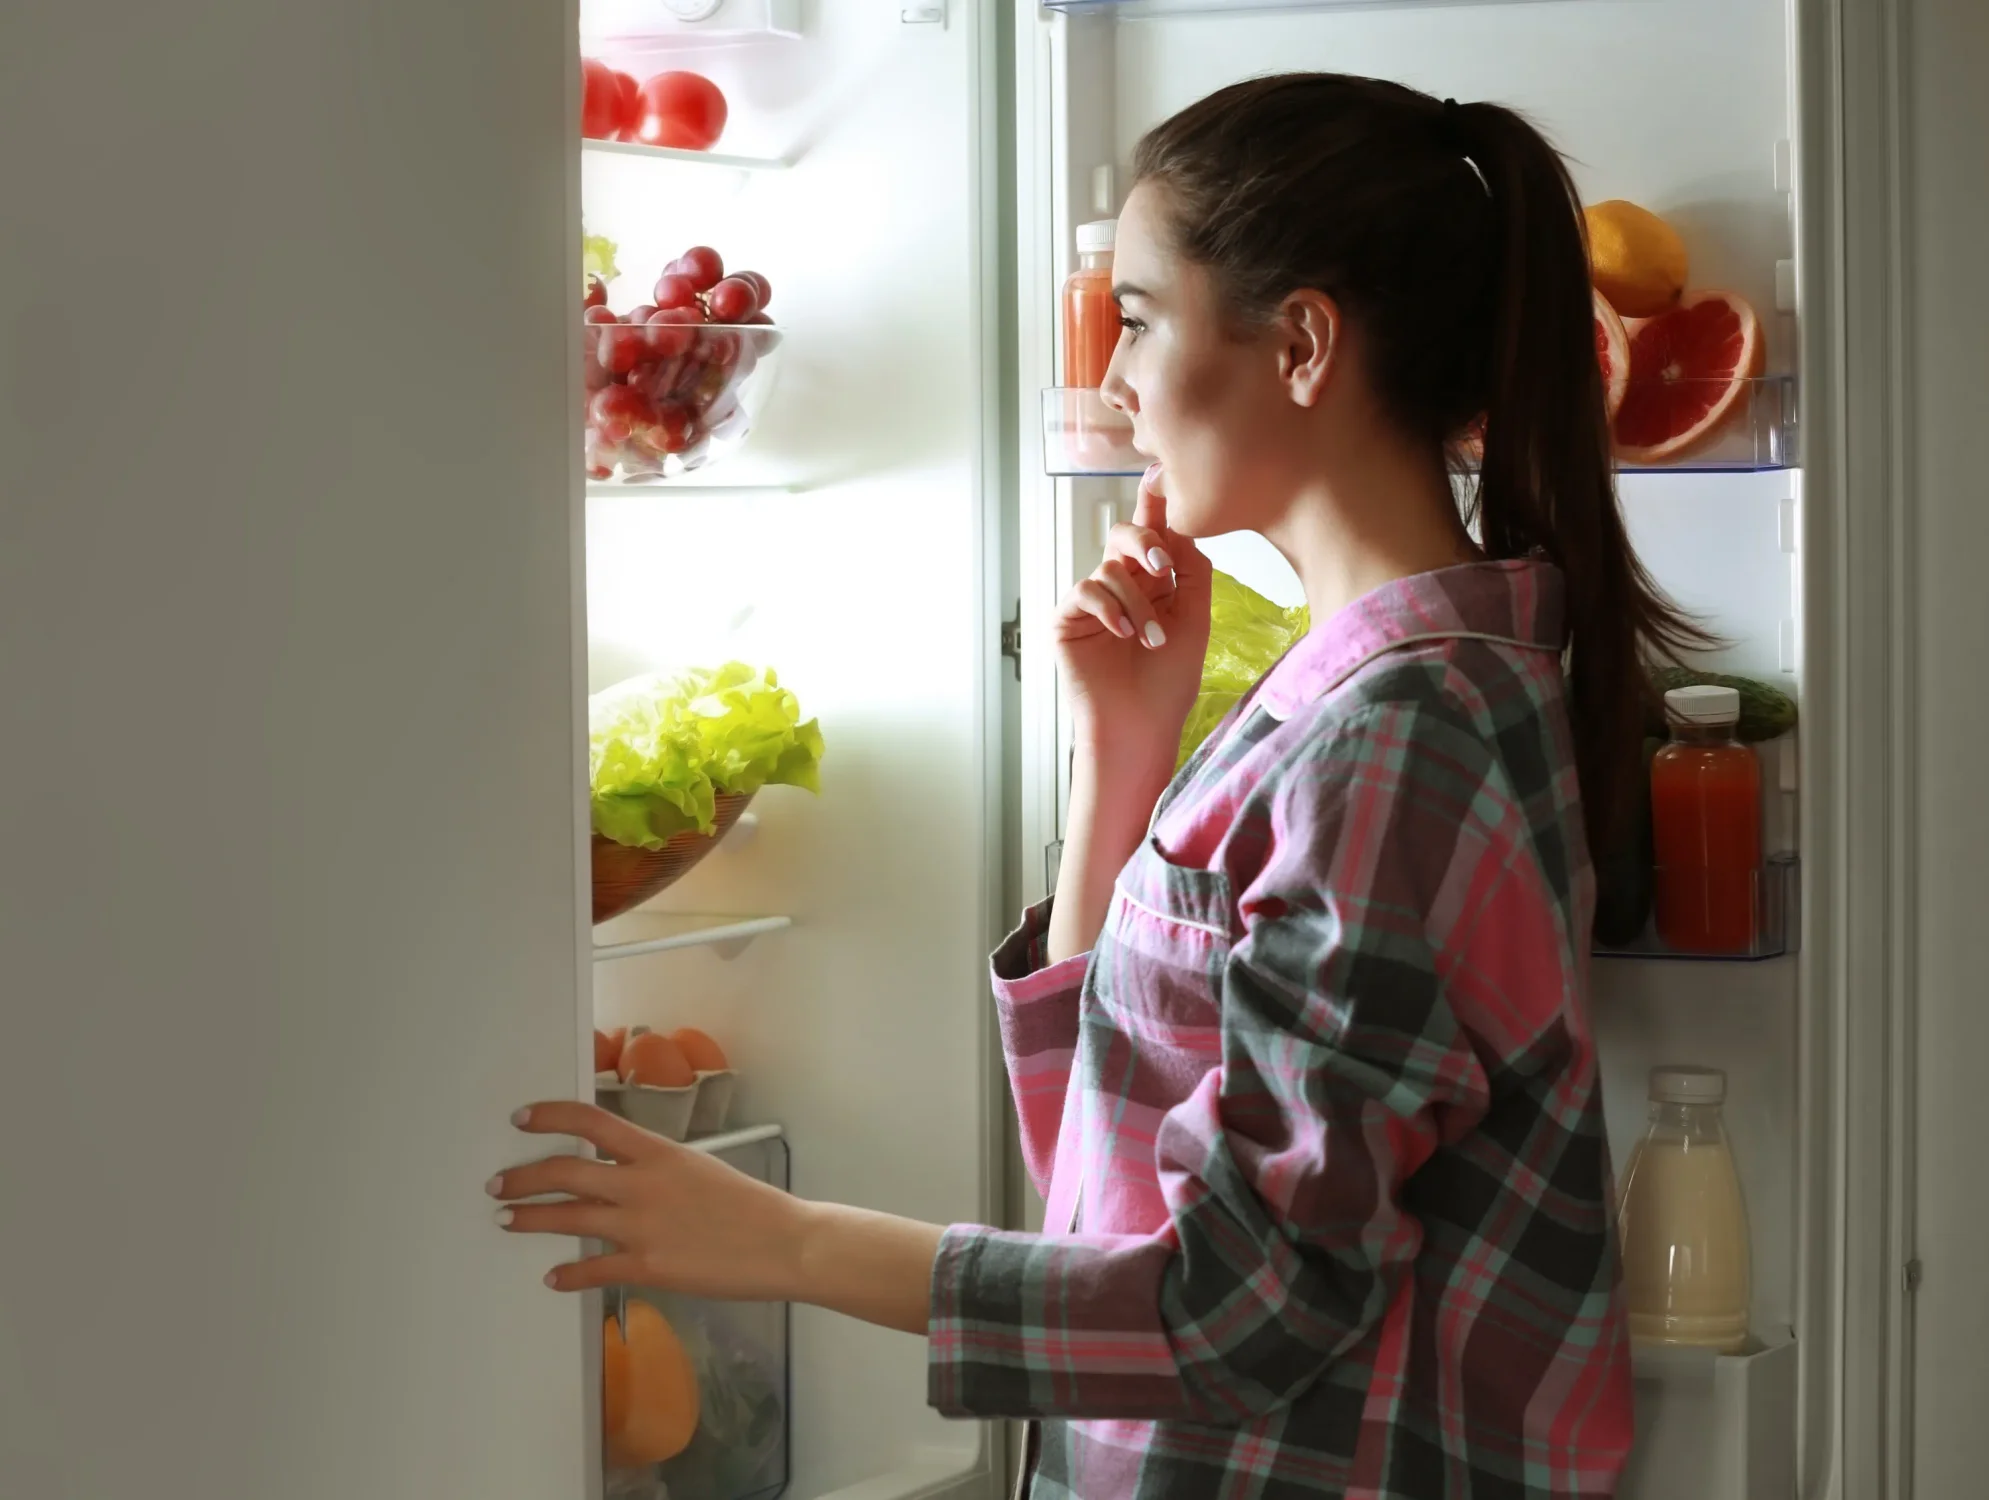 Young woman in pajamas looking into the fridge deciding what to eat for a night snack.